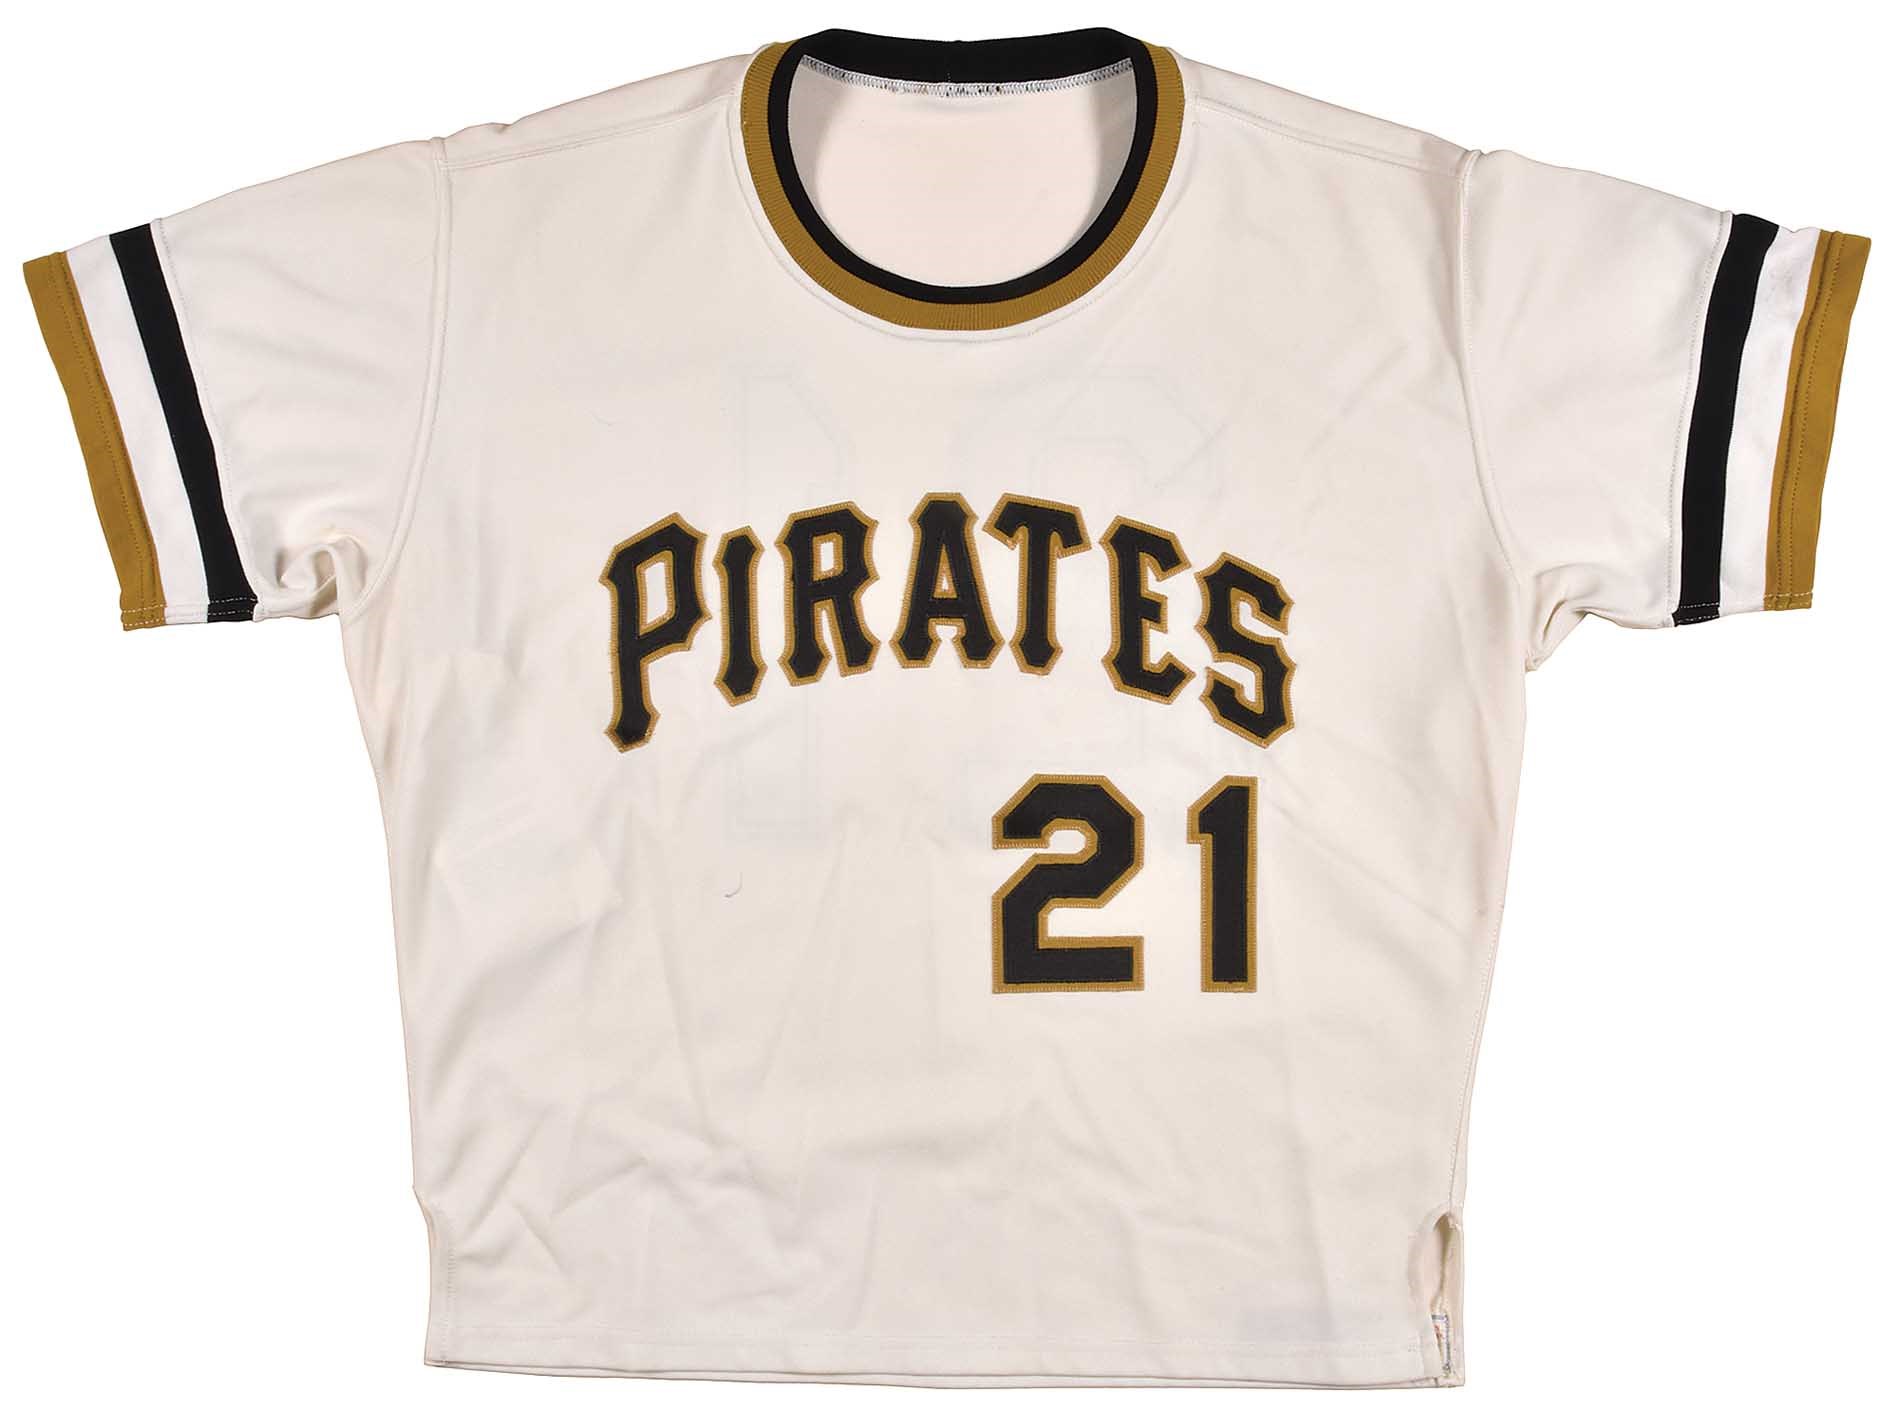 pittsburgh pirates jersey clemente